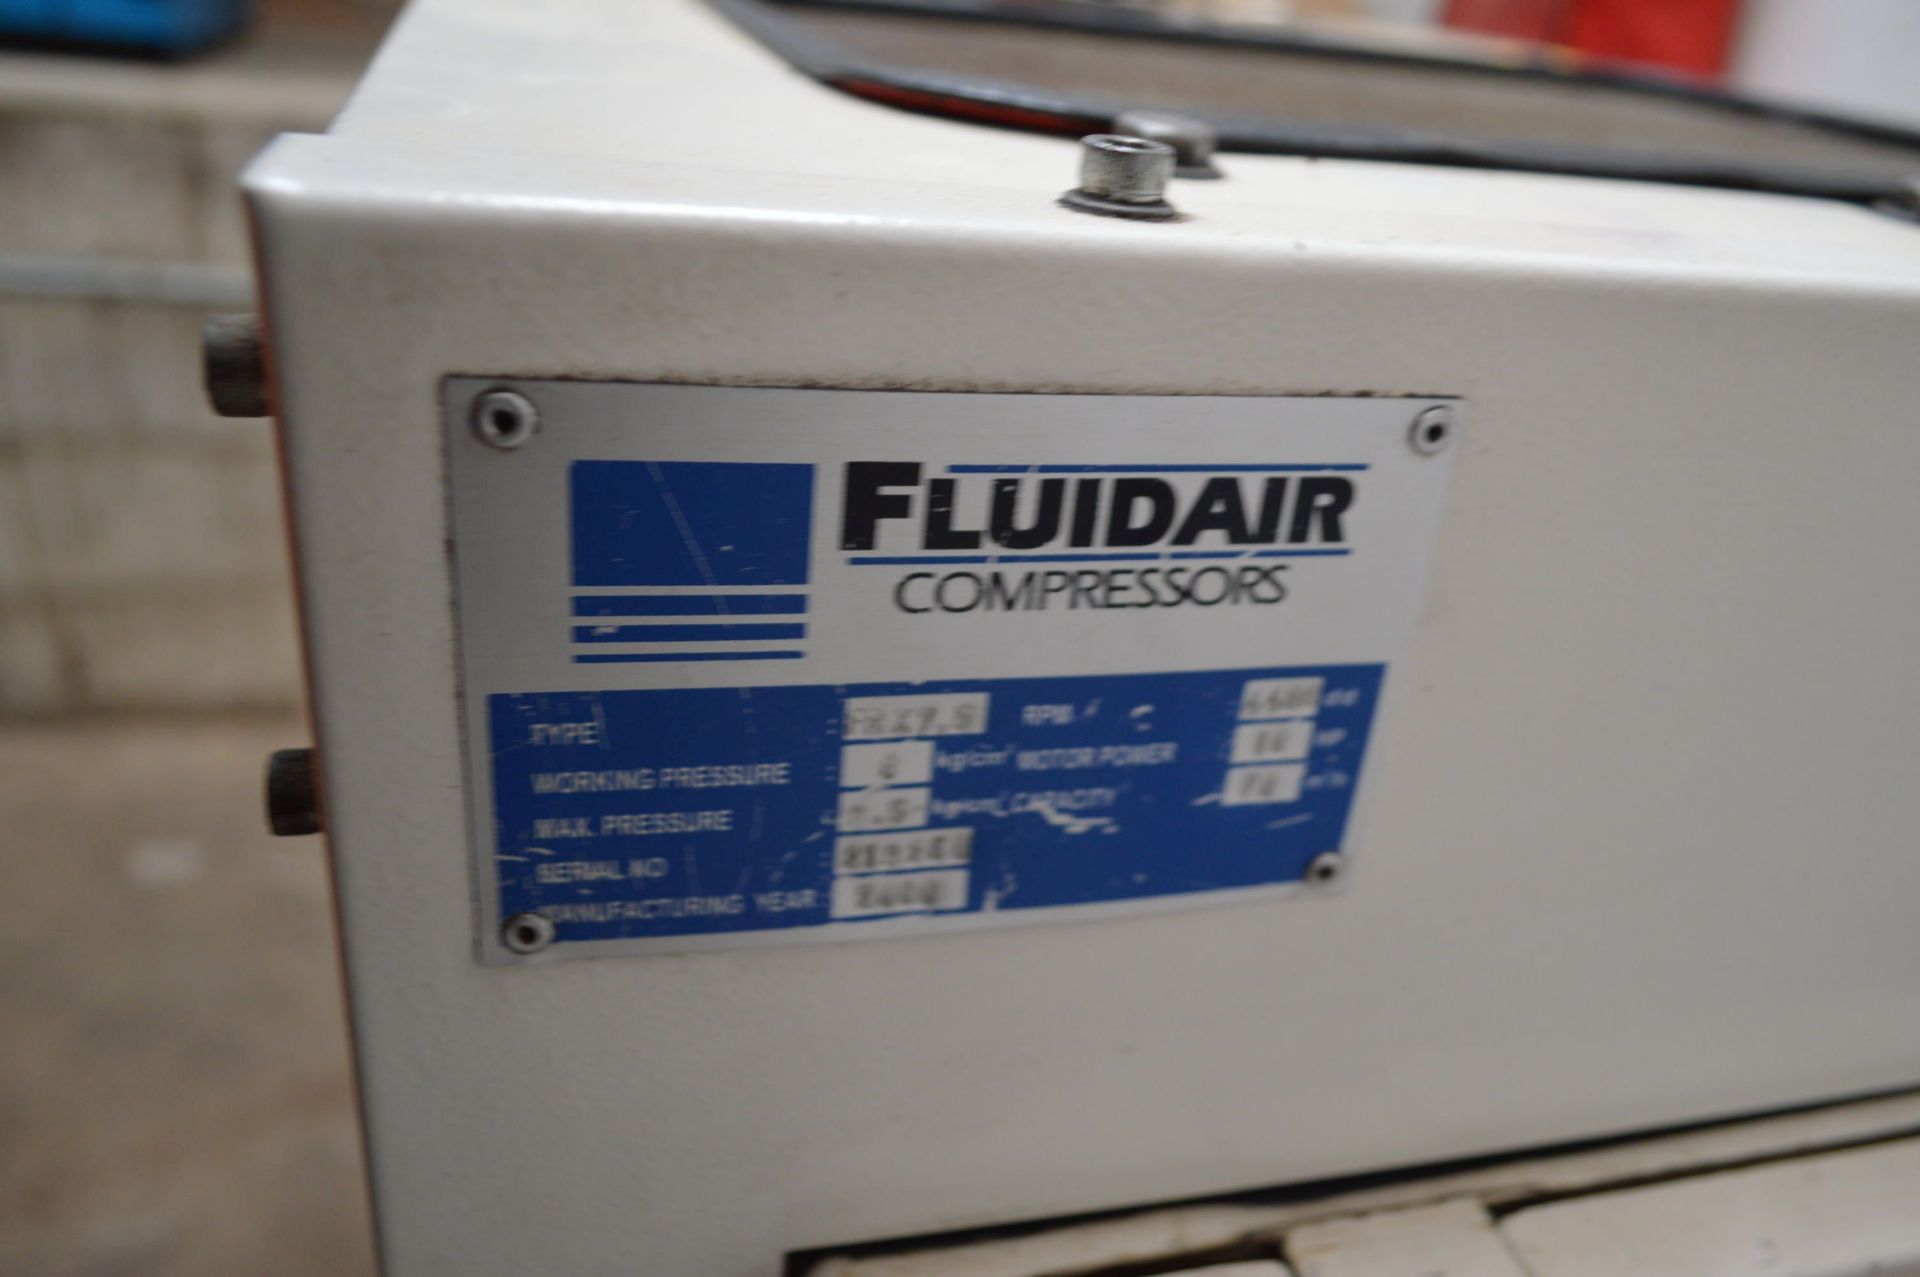 Fluidair FRX75 Packaged Air Compressor, serial no. 213260, 70 m³/ hr, 025703 hours (at time of - Image 4 of 4